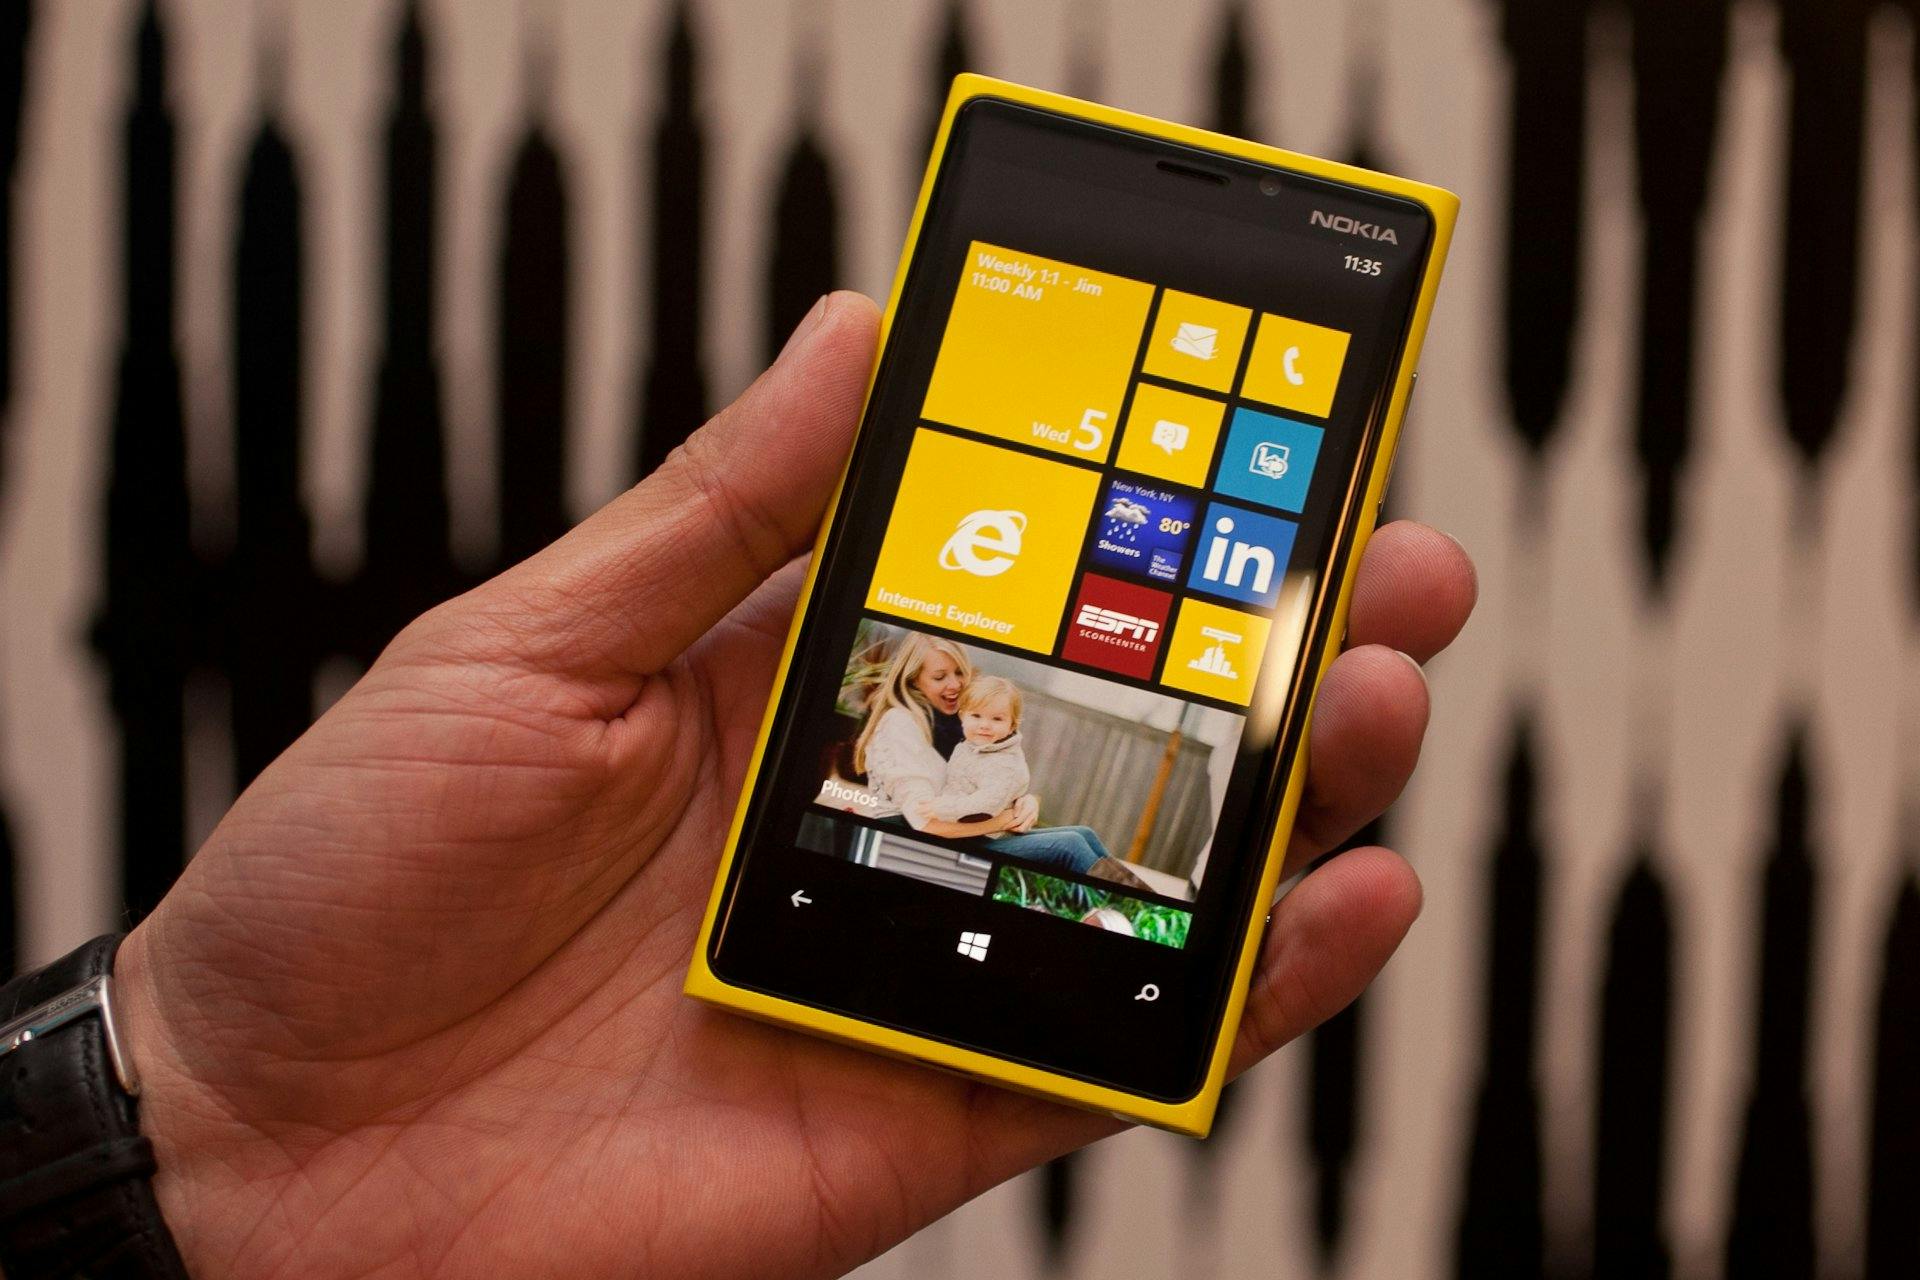 How To Update The Software On Nokia Lumia 920 featured image